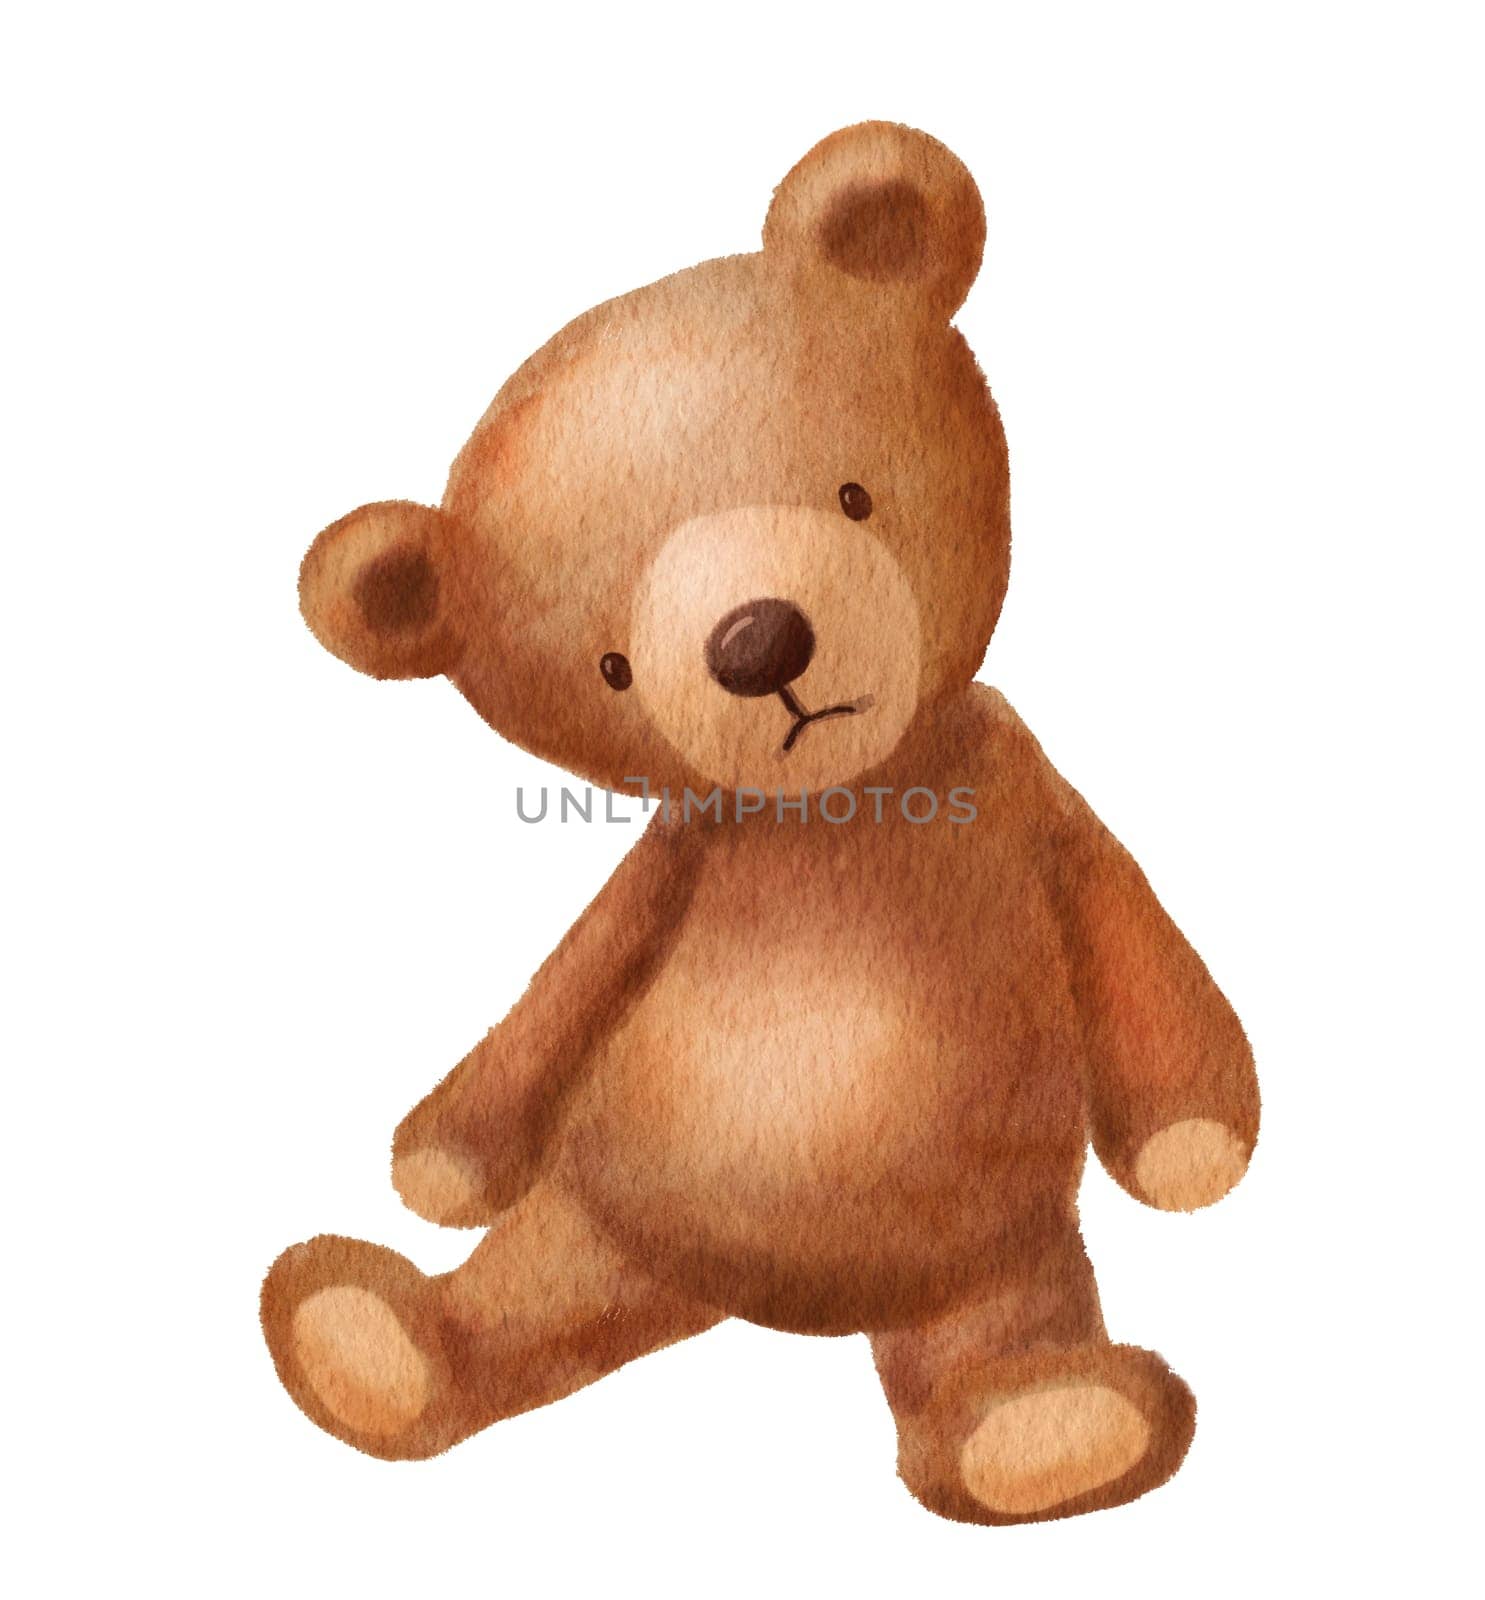 Watercolor cute sad bear toy. Hand drawn illustration isolated on white